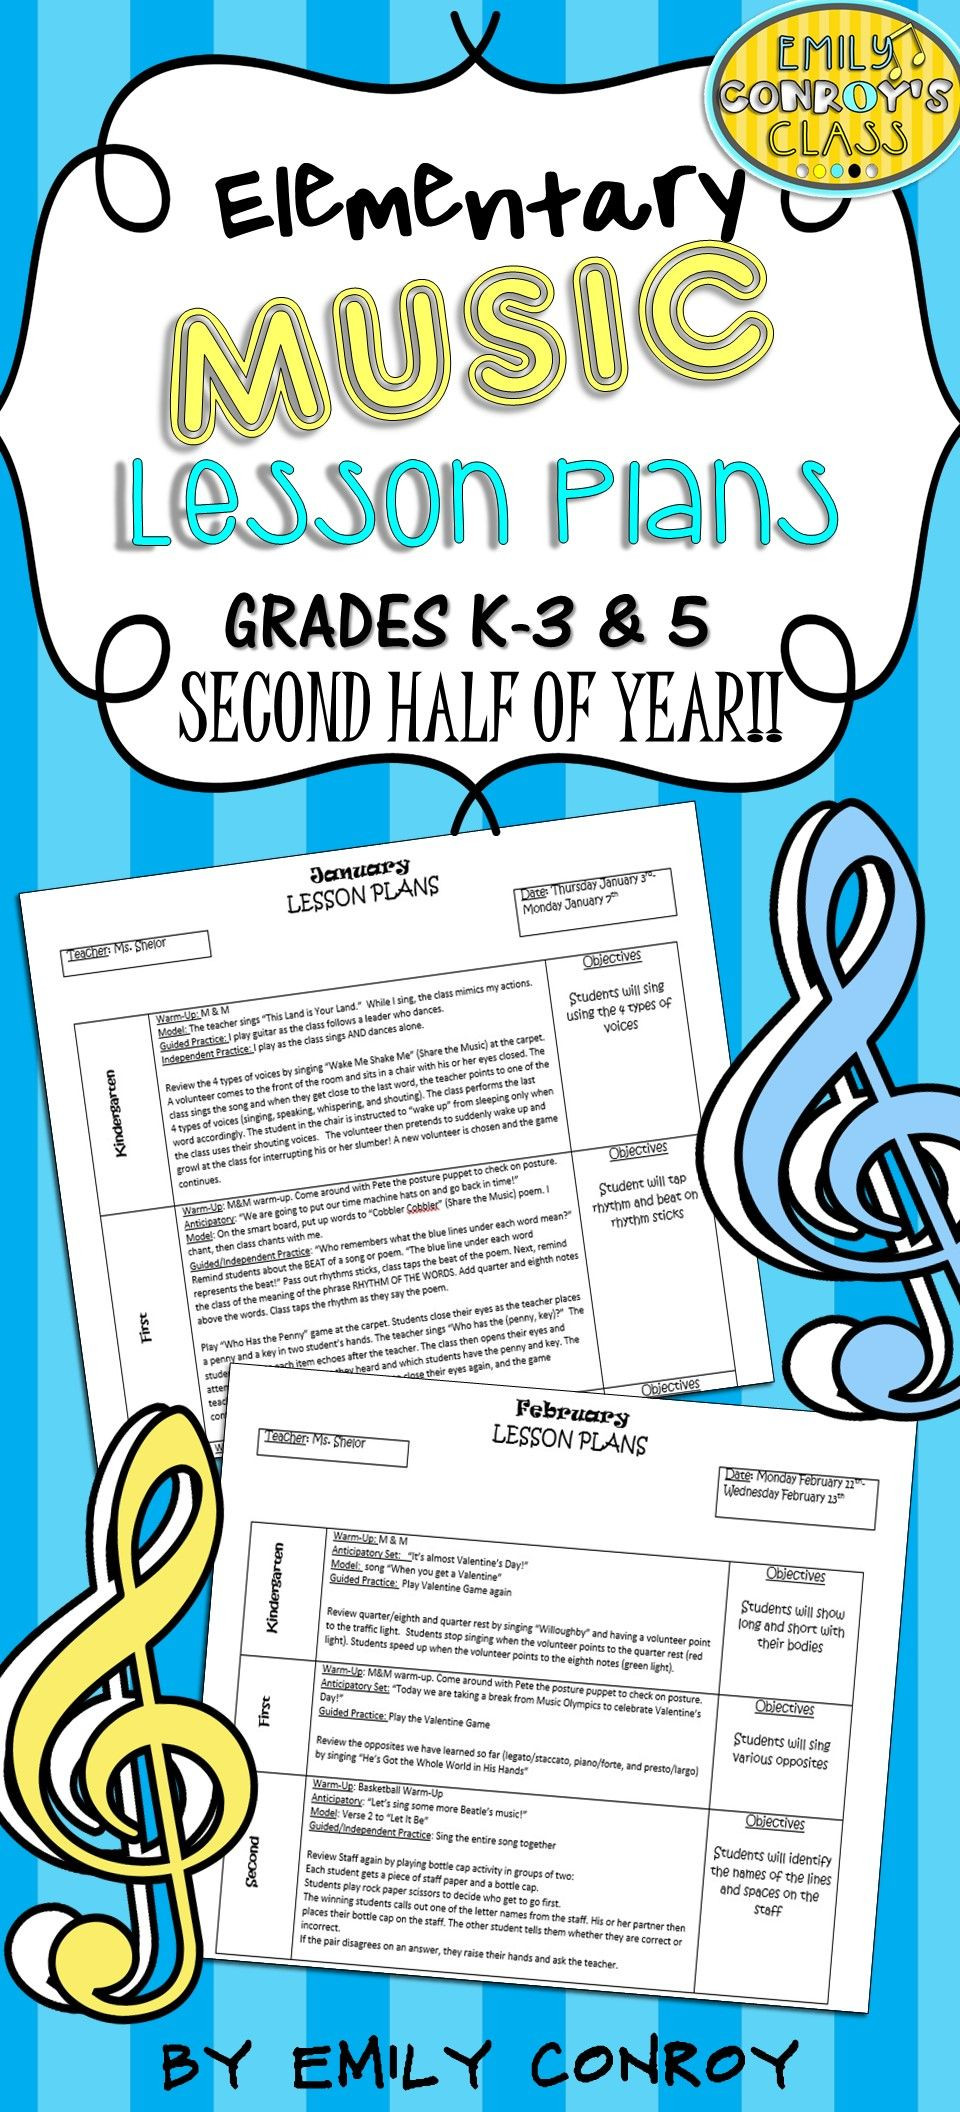 Music Lesson Plans for Preschool Elementary Music Lessons Plans these Plans are Creative